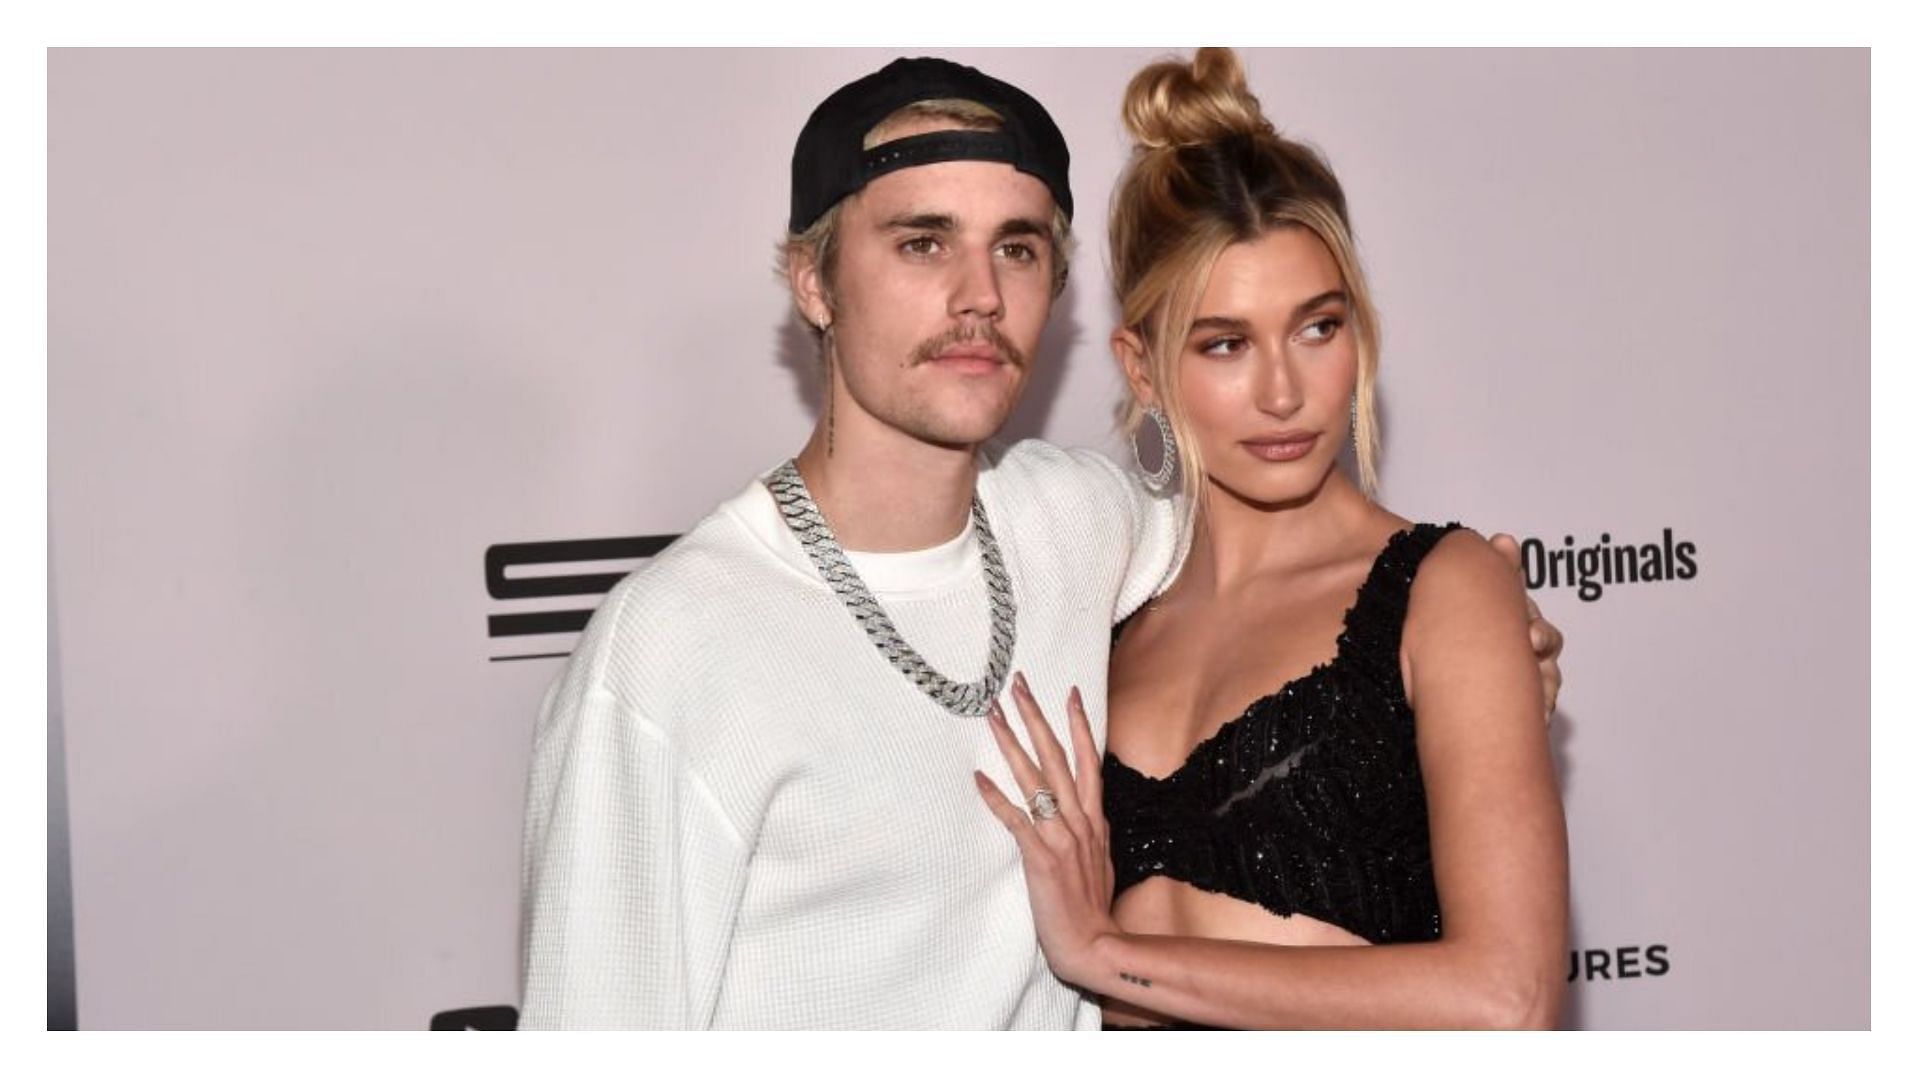 Justin Bieber and Hailey Bieber got stronger following their health issues (Image via Alberto E. Rodriguez/Getty Images)